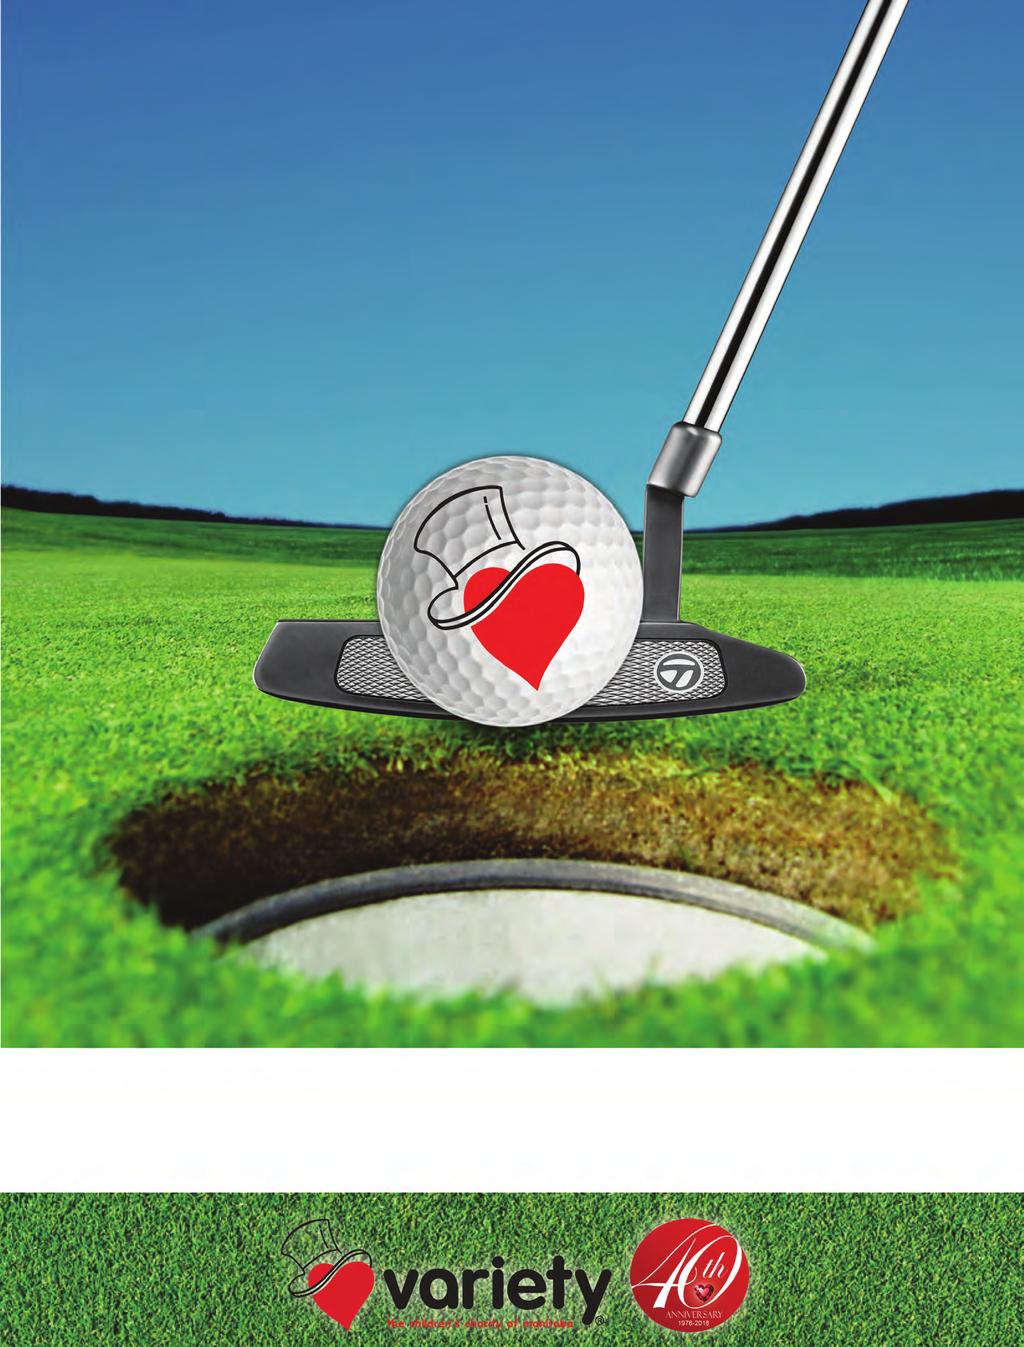 Variety s Drive Fore the Kids GOLF CLASSIC Tuesday, August 28th,